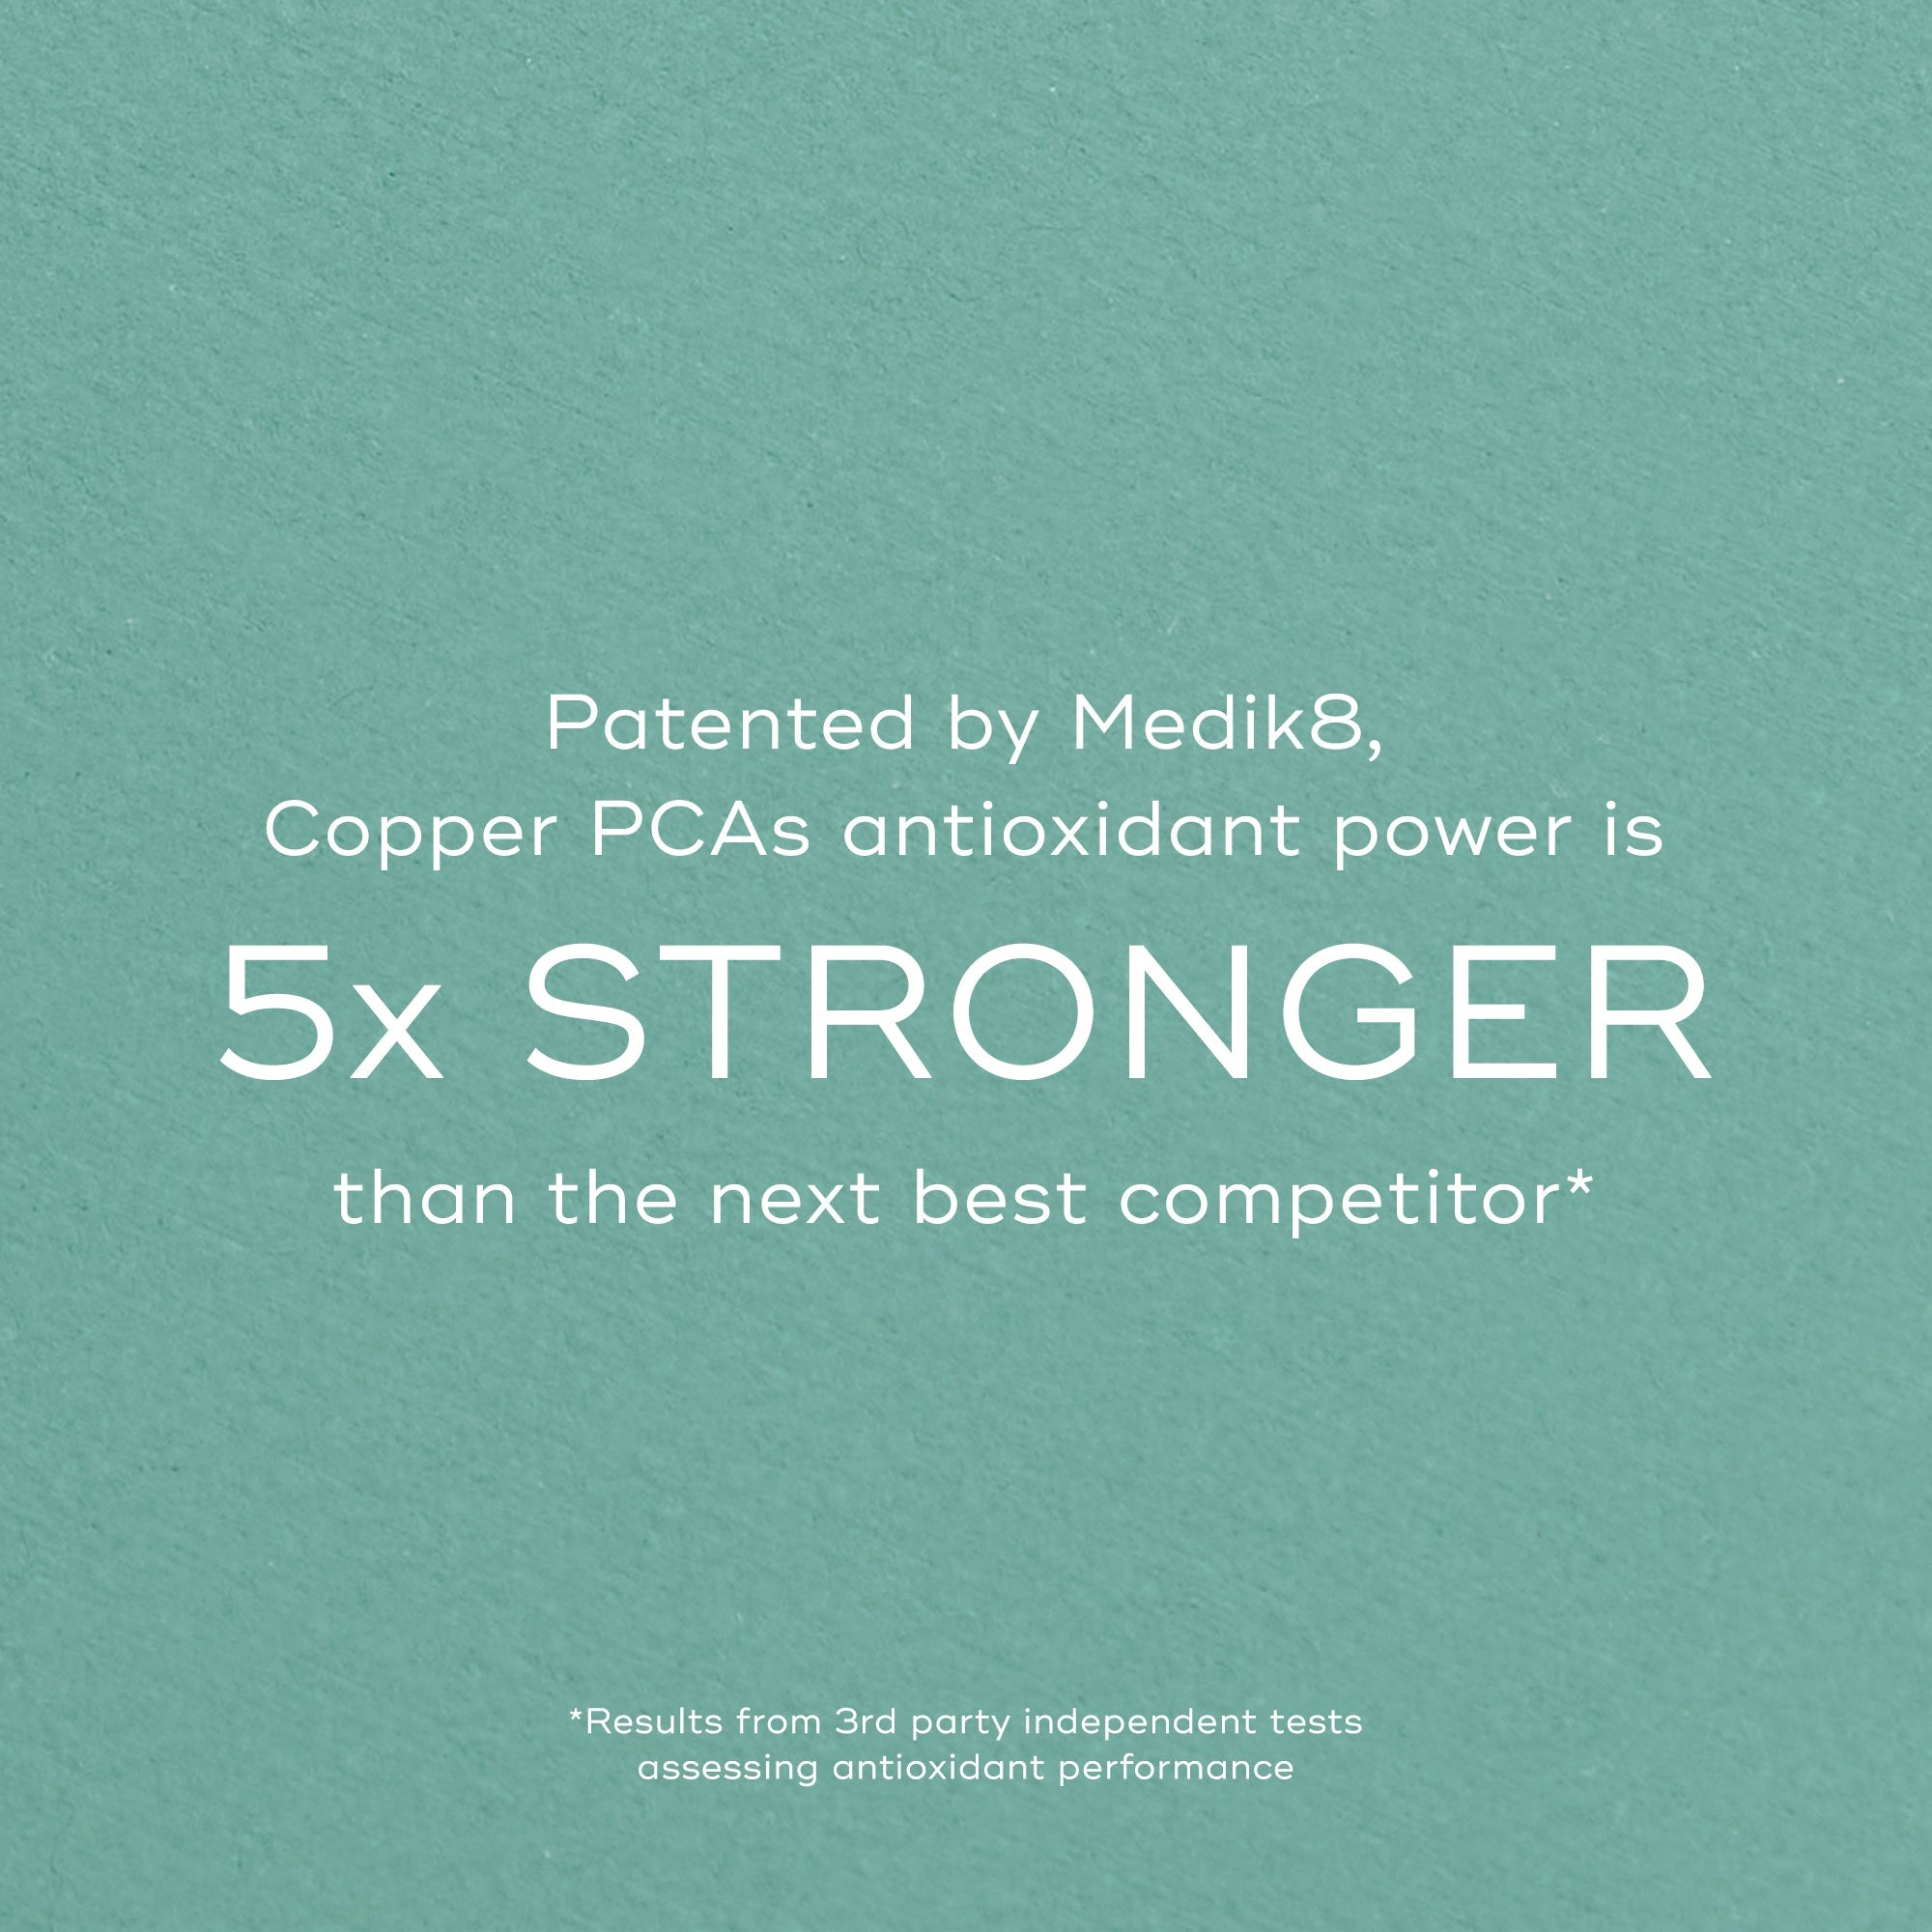 Copper PCA Peptides™ by Medik8. A Mineral Antioxidant Peptide Serum